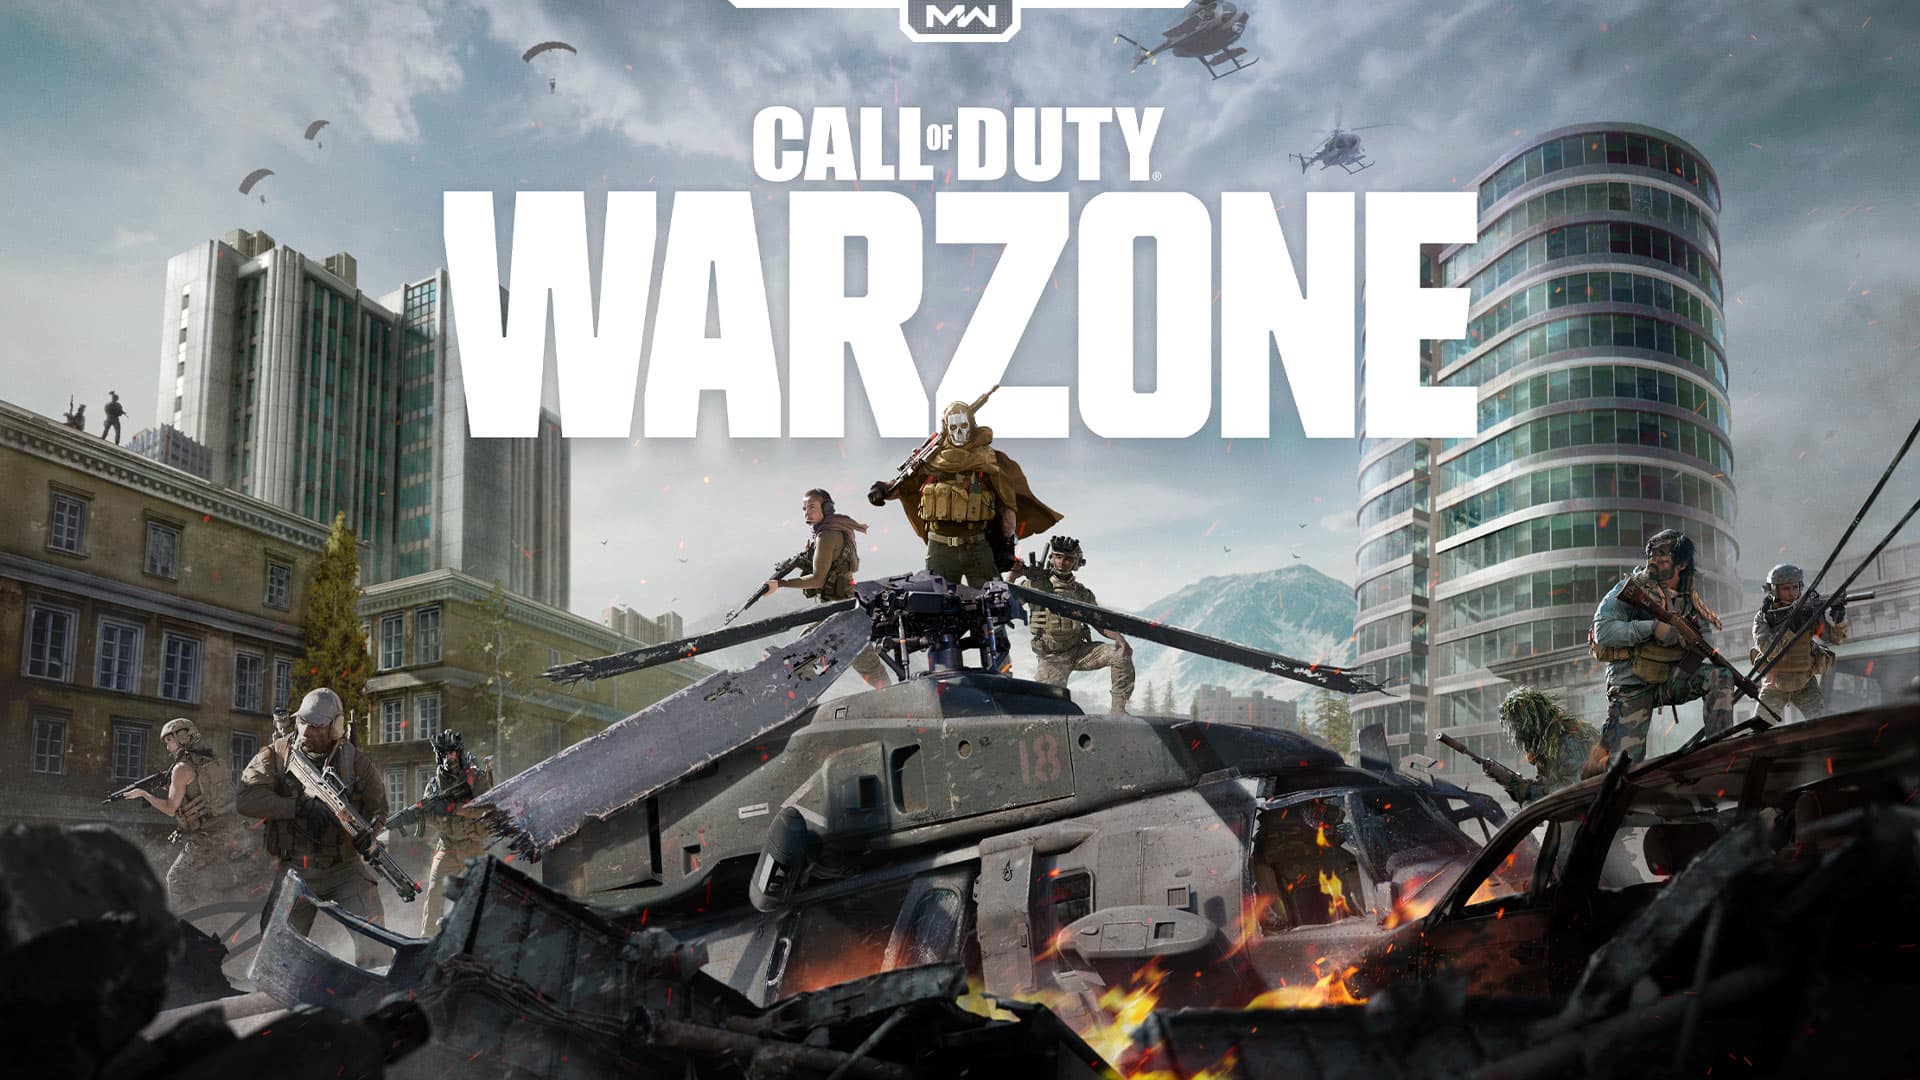 Call of duty warzone poderá ter versão mobile | d3c14520 wz social share 1 | activision, cod warzone, multiplayer, pc, playstation 4, xbox one | call of duty warzone notícias